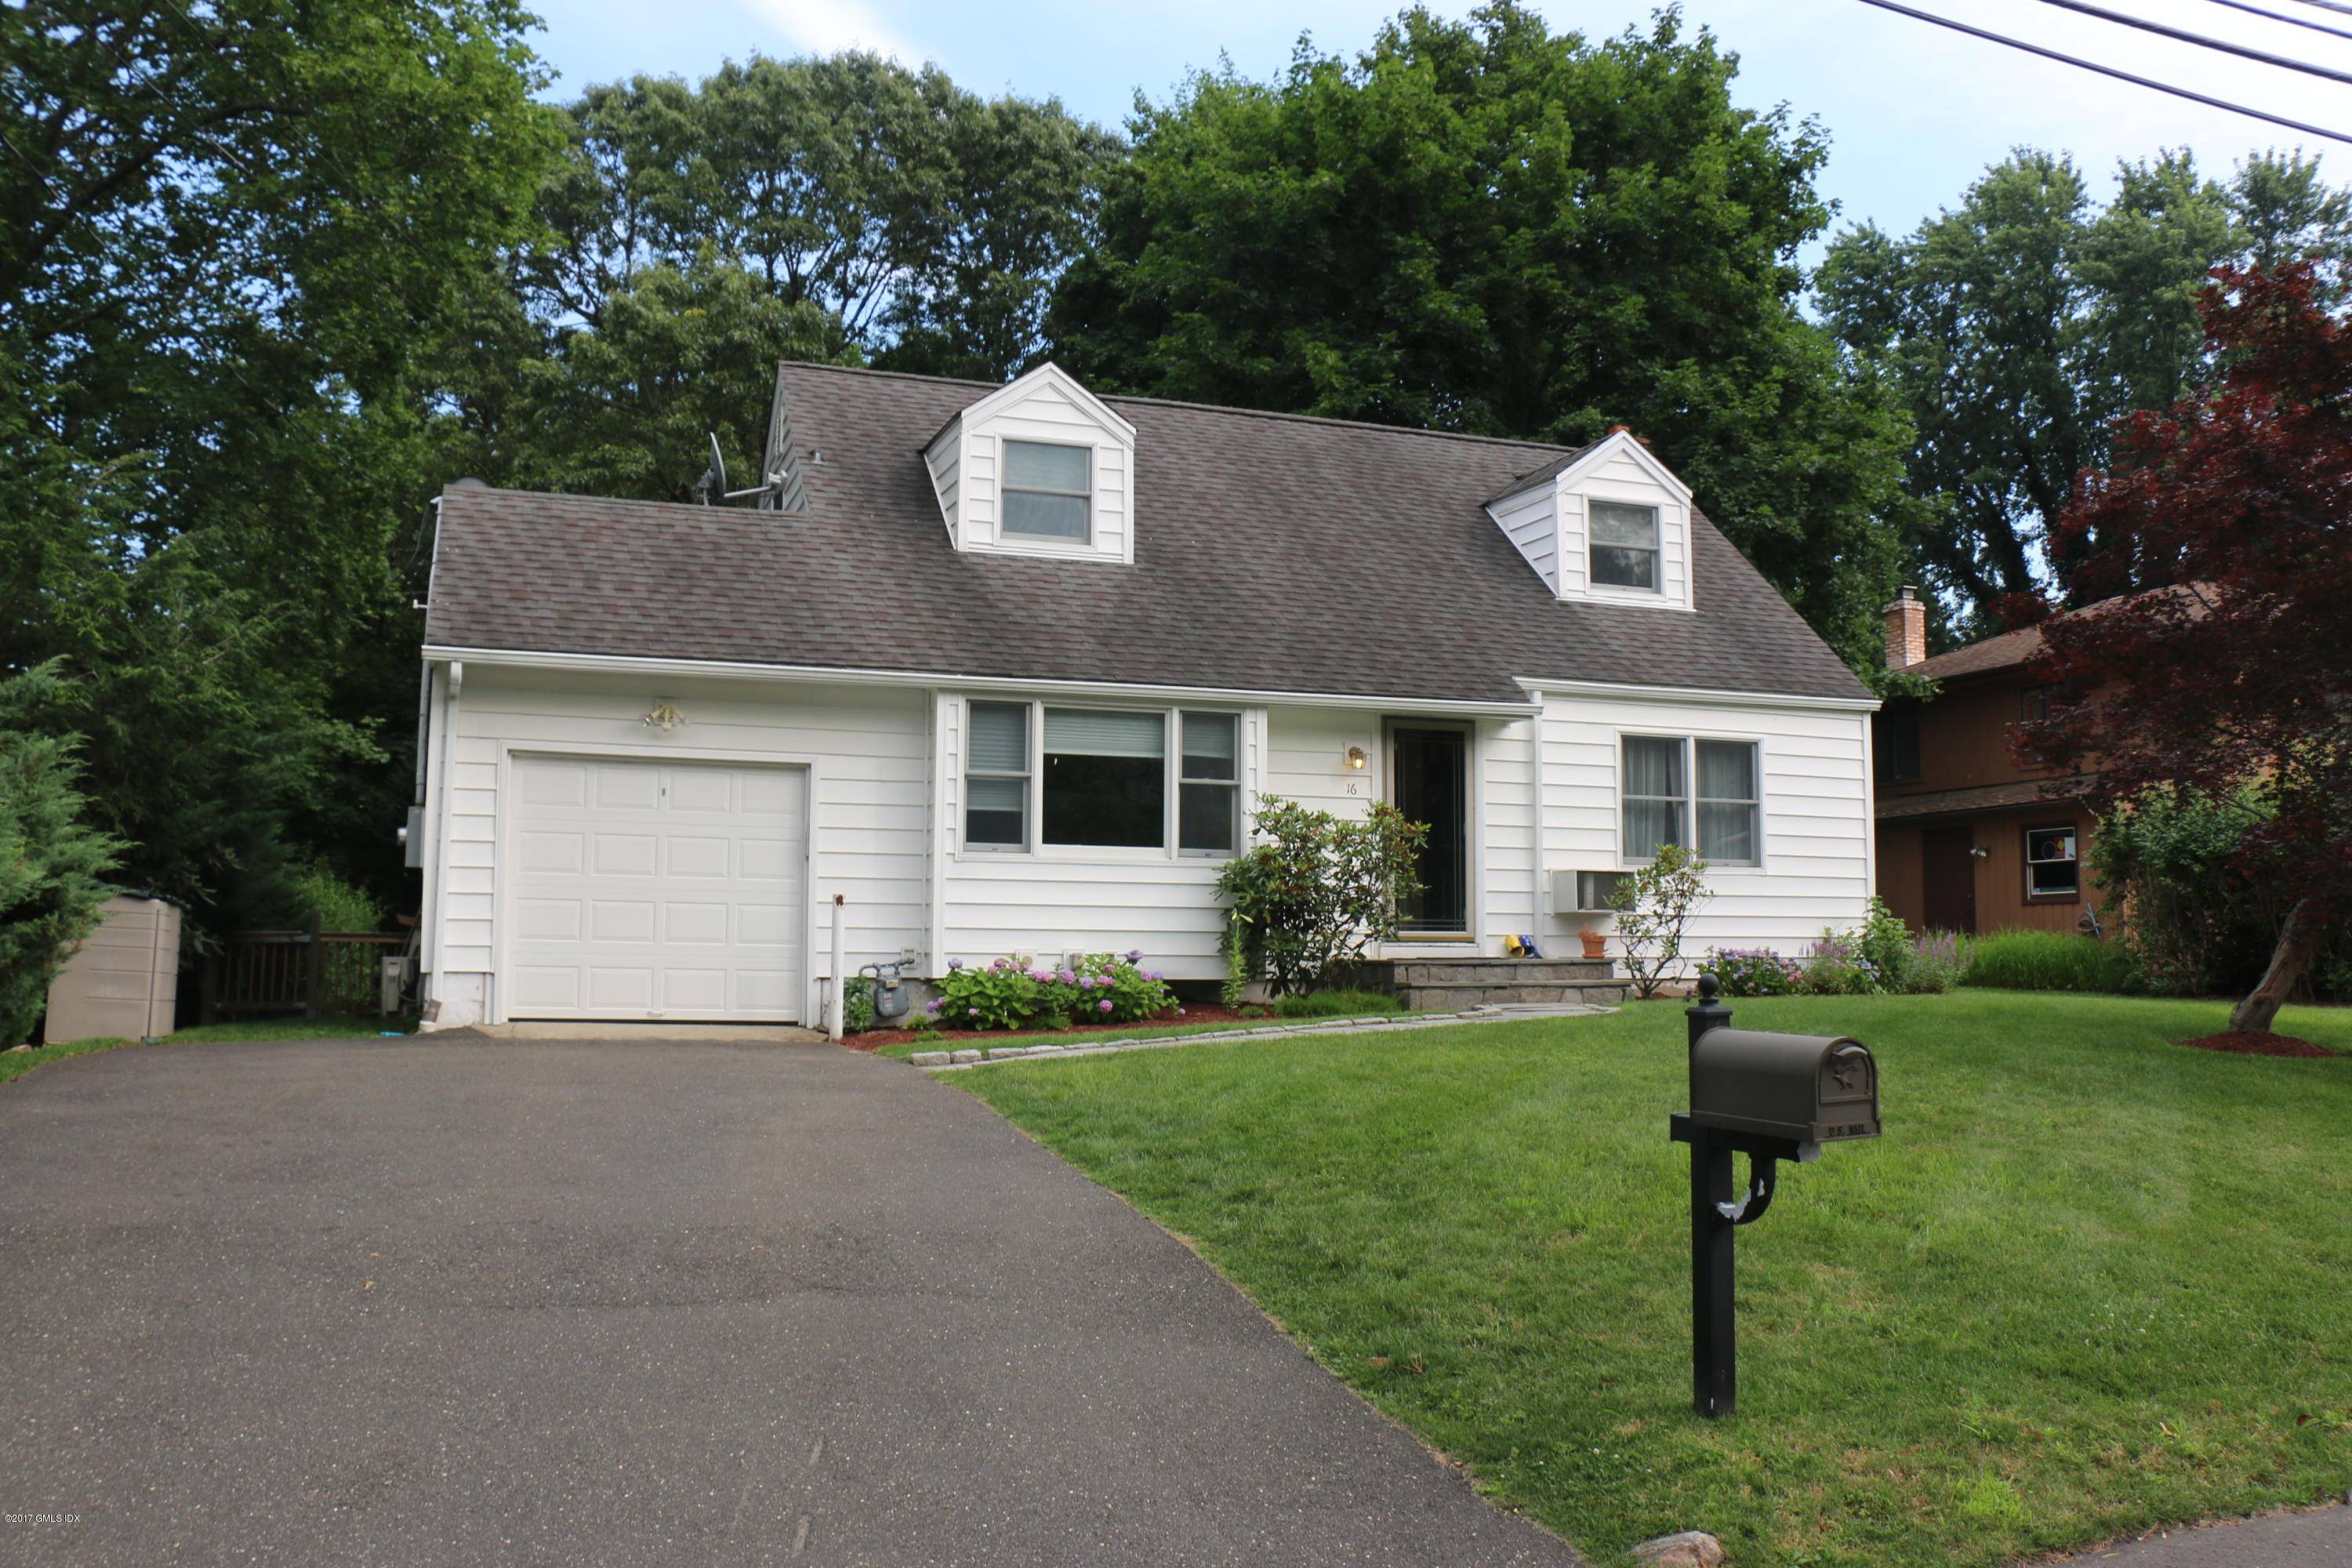 Up dated Cape located on quiet street with convenient access to shopping, schools, and more.